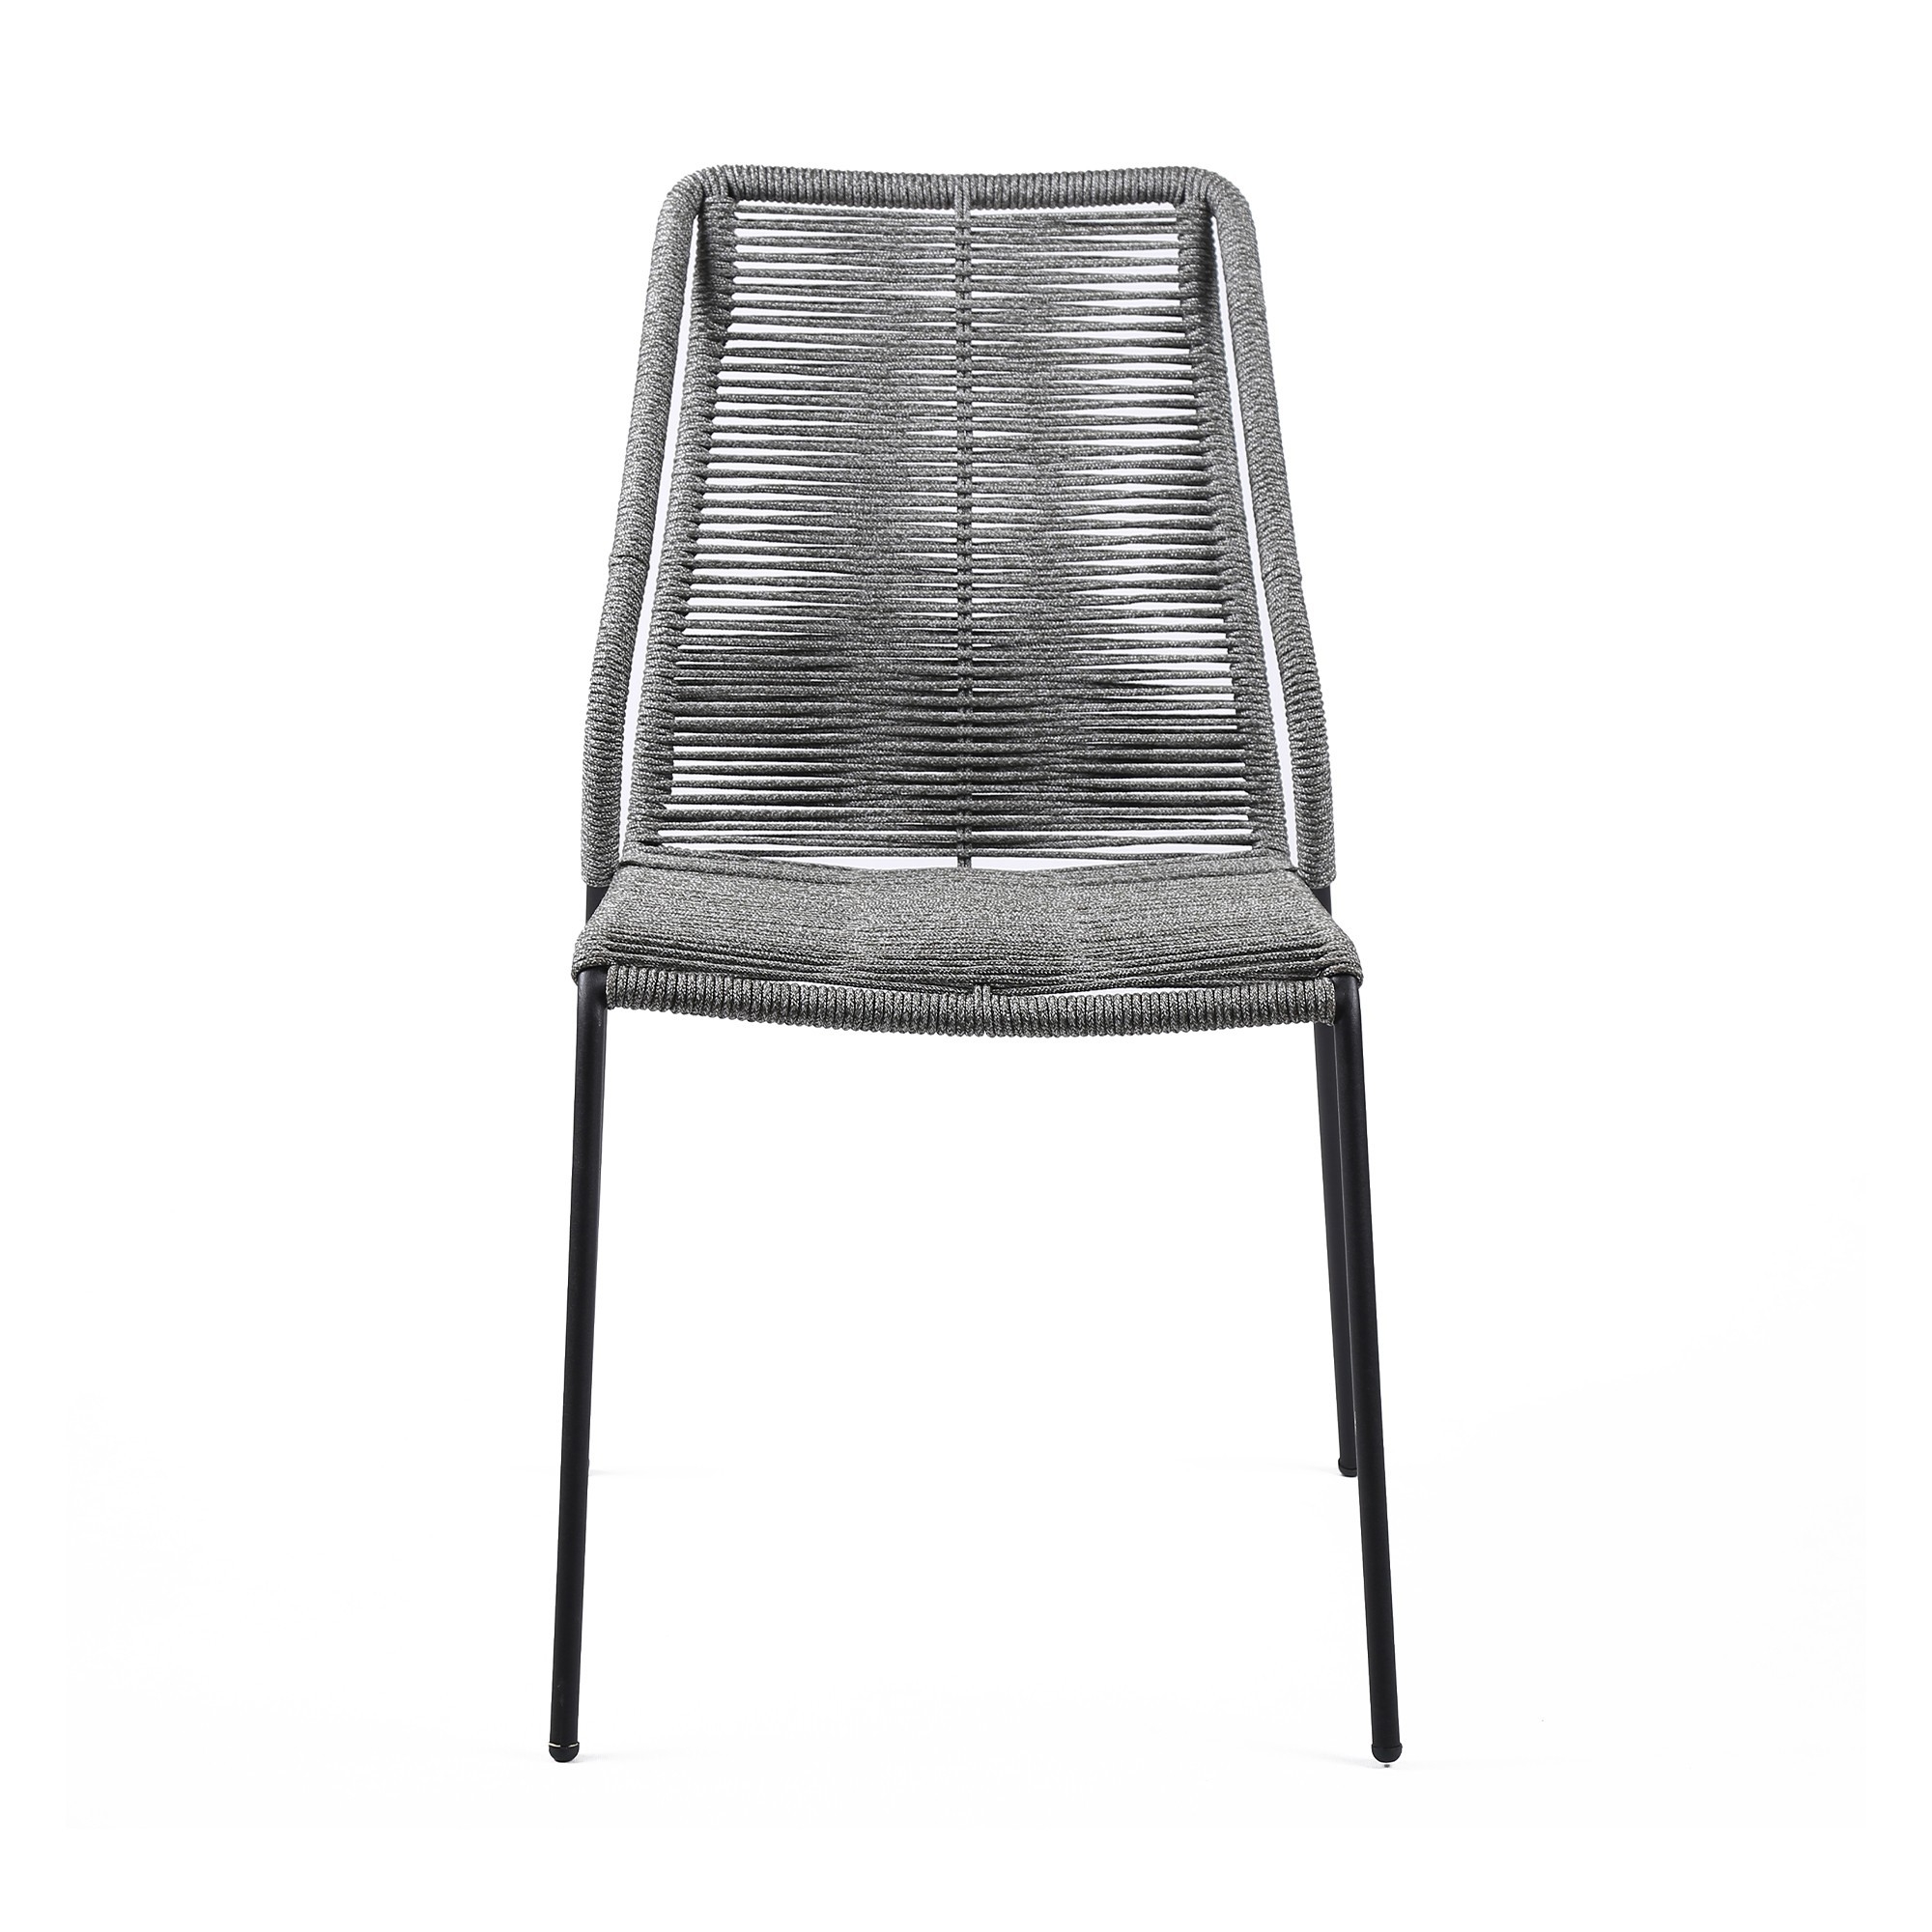 Indoor Outdoor Dining Chair With Fishbone Woven Seating, Set Of 2, Gray- Saltoro Sherpi